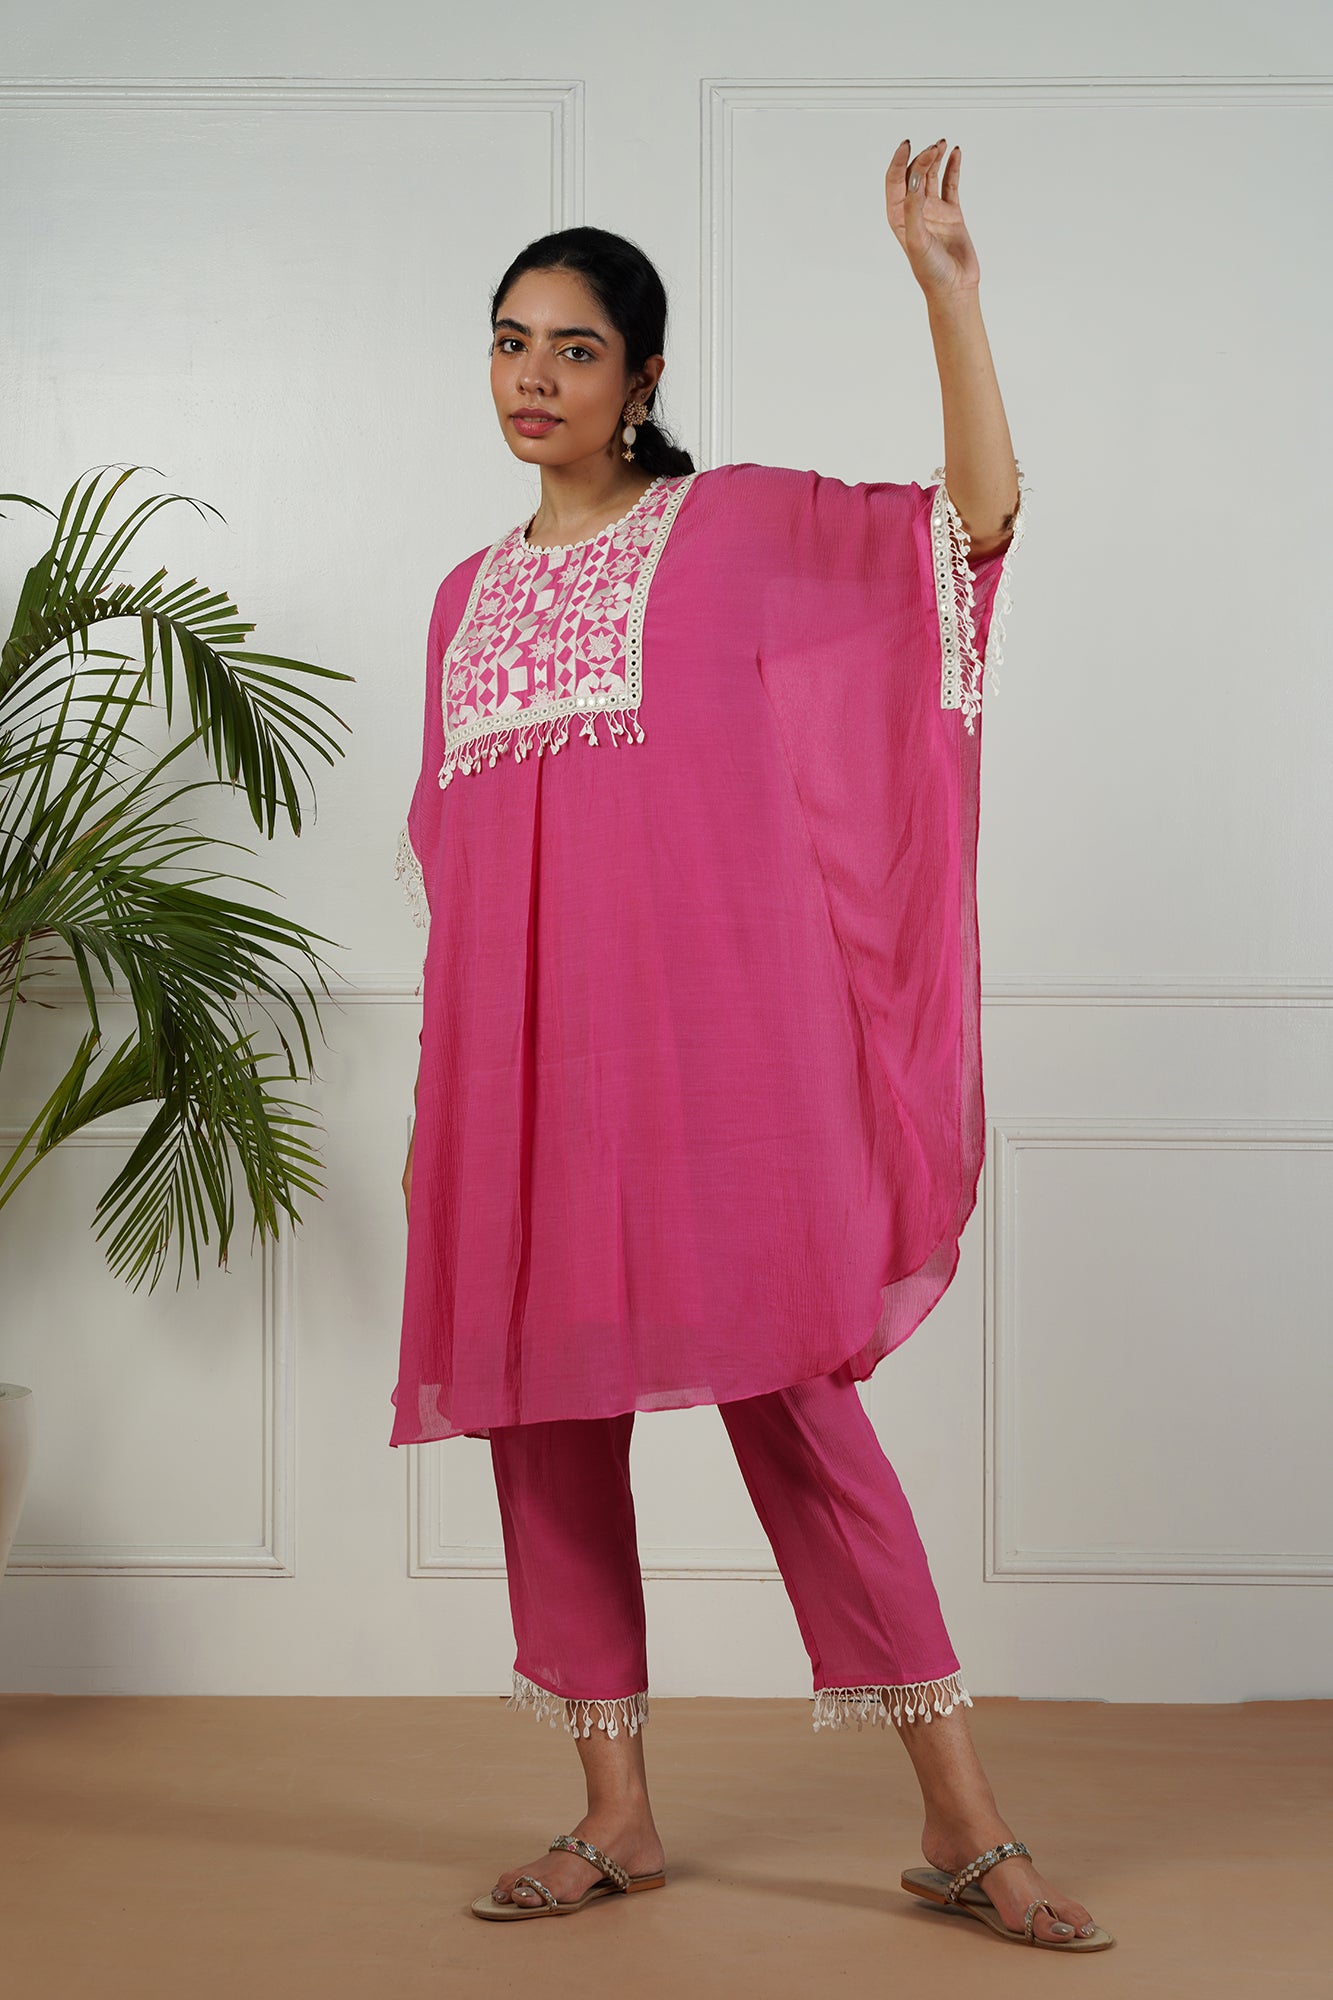 Bubble Gum Pink Bright Kaftan Set with embroidered yoke